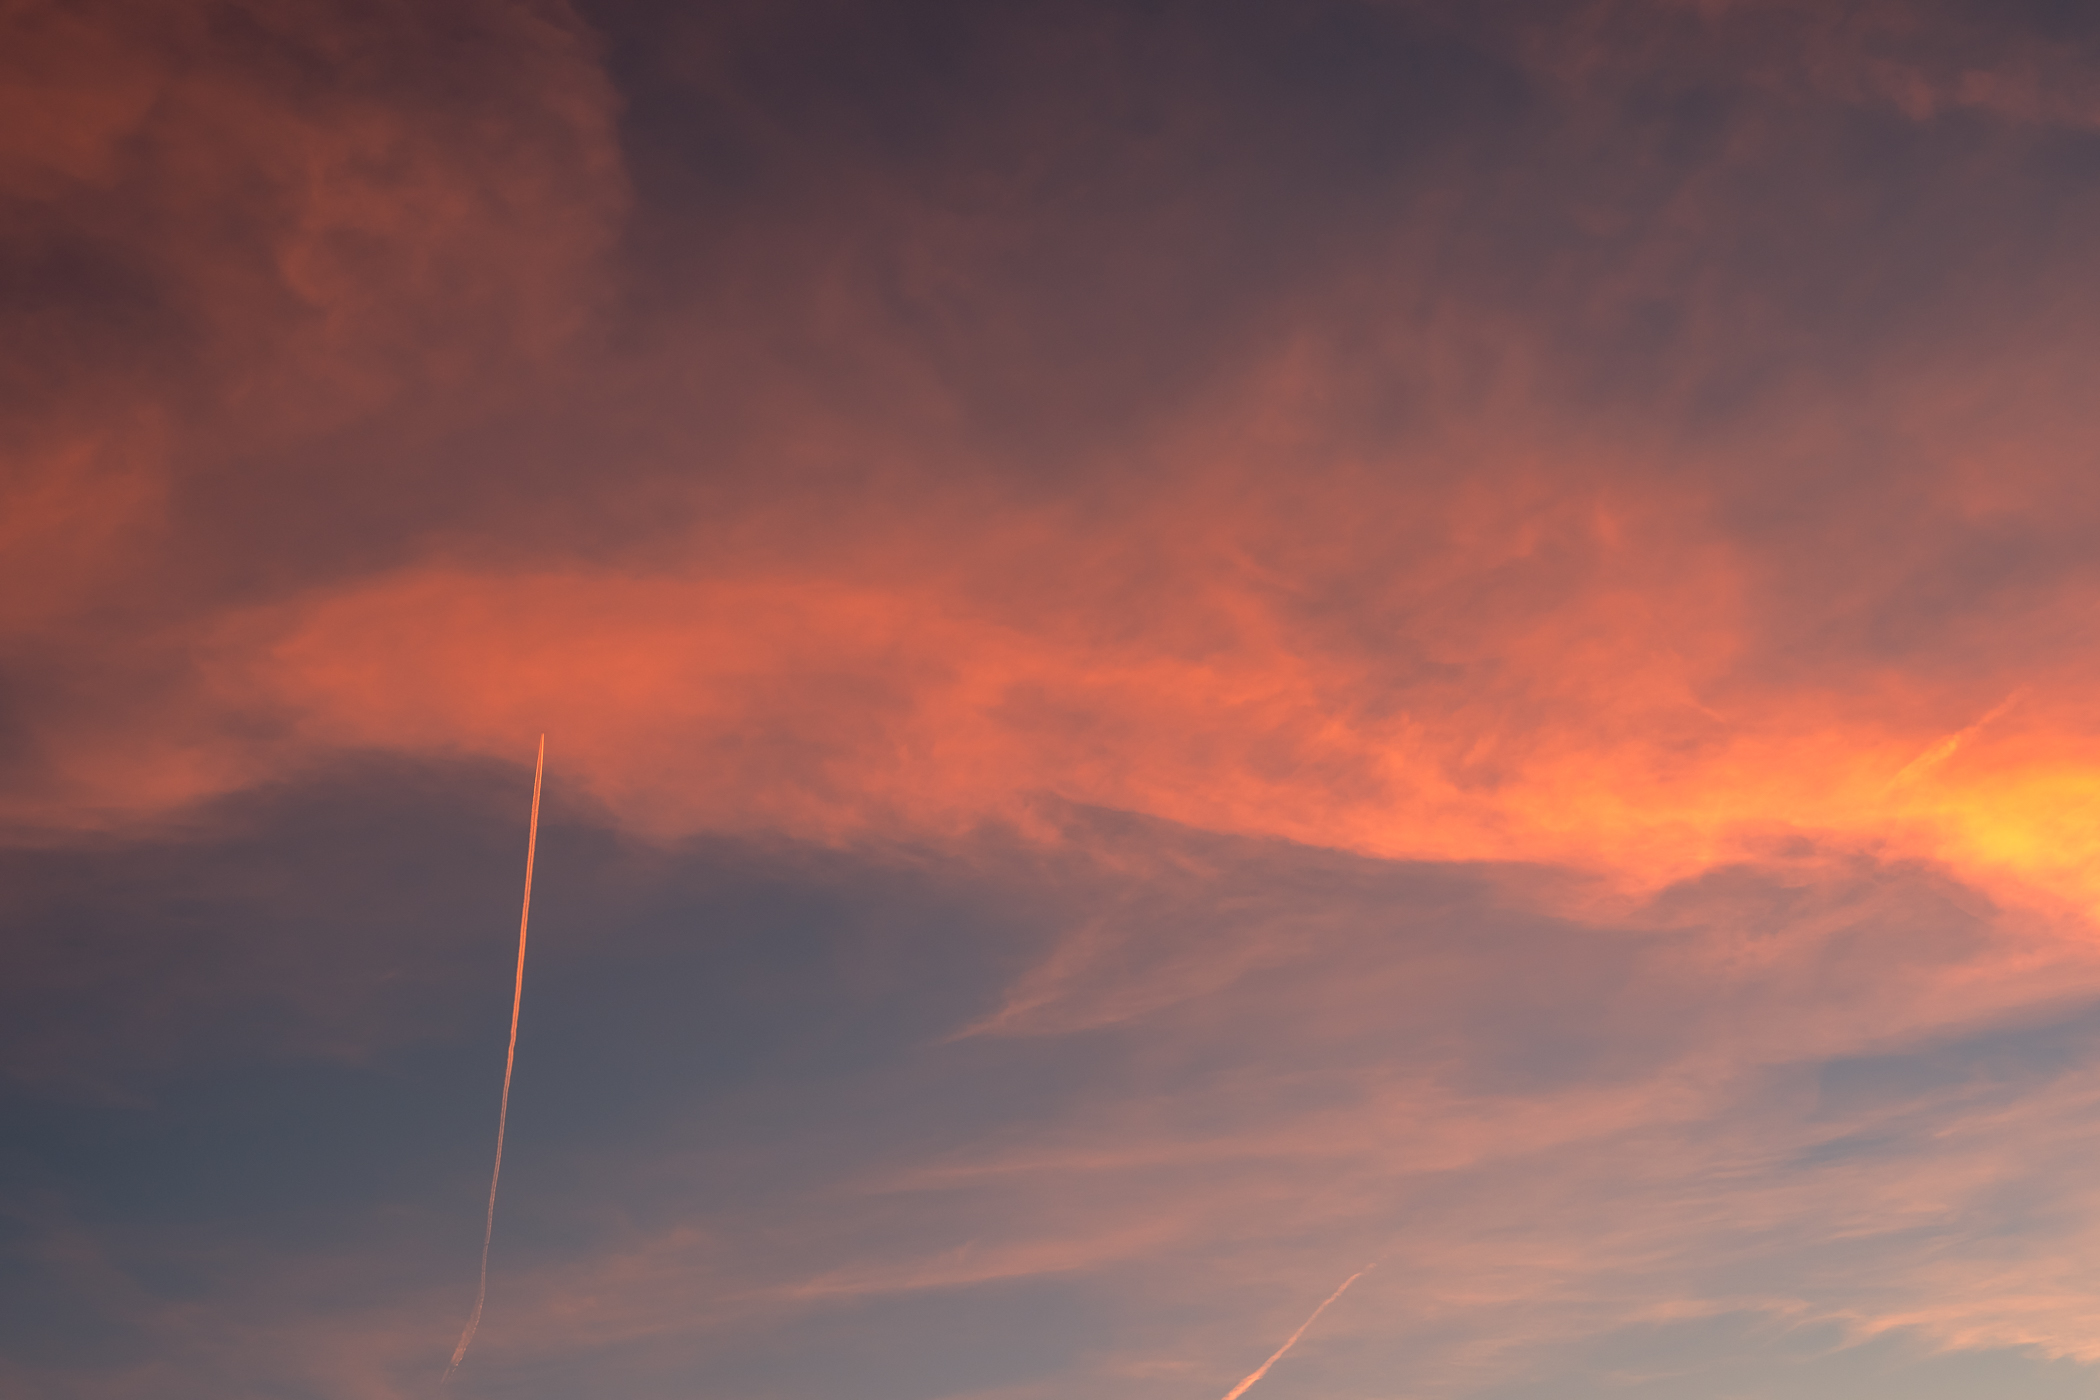 A jet leaves a contrail in the evening sky over the Dallas area as seen from McKinney, Texas.